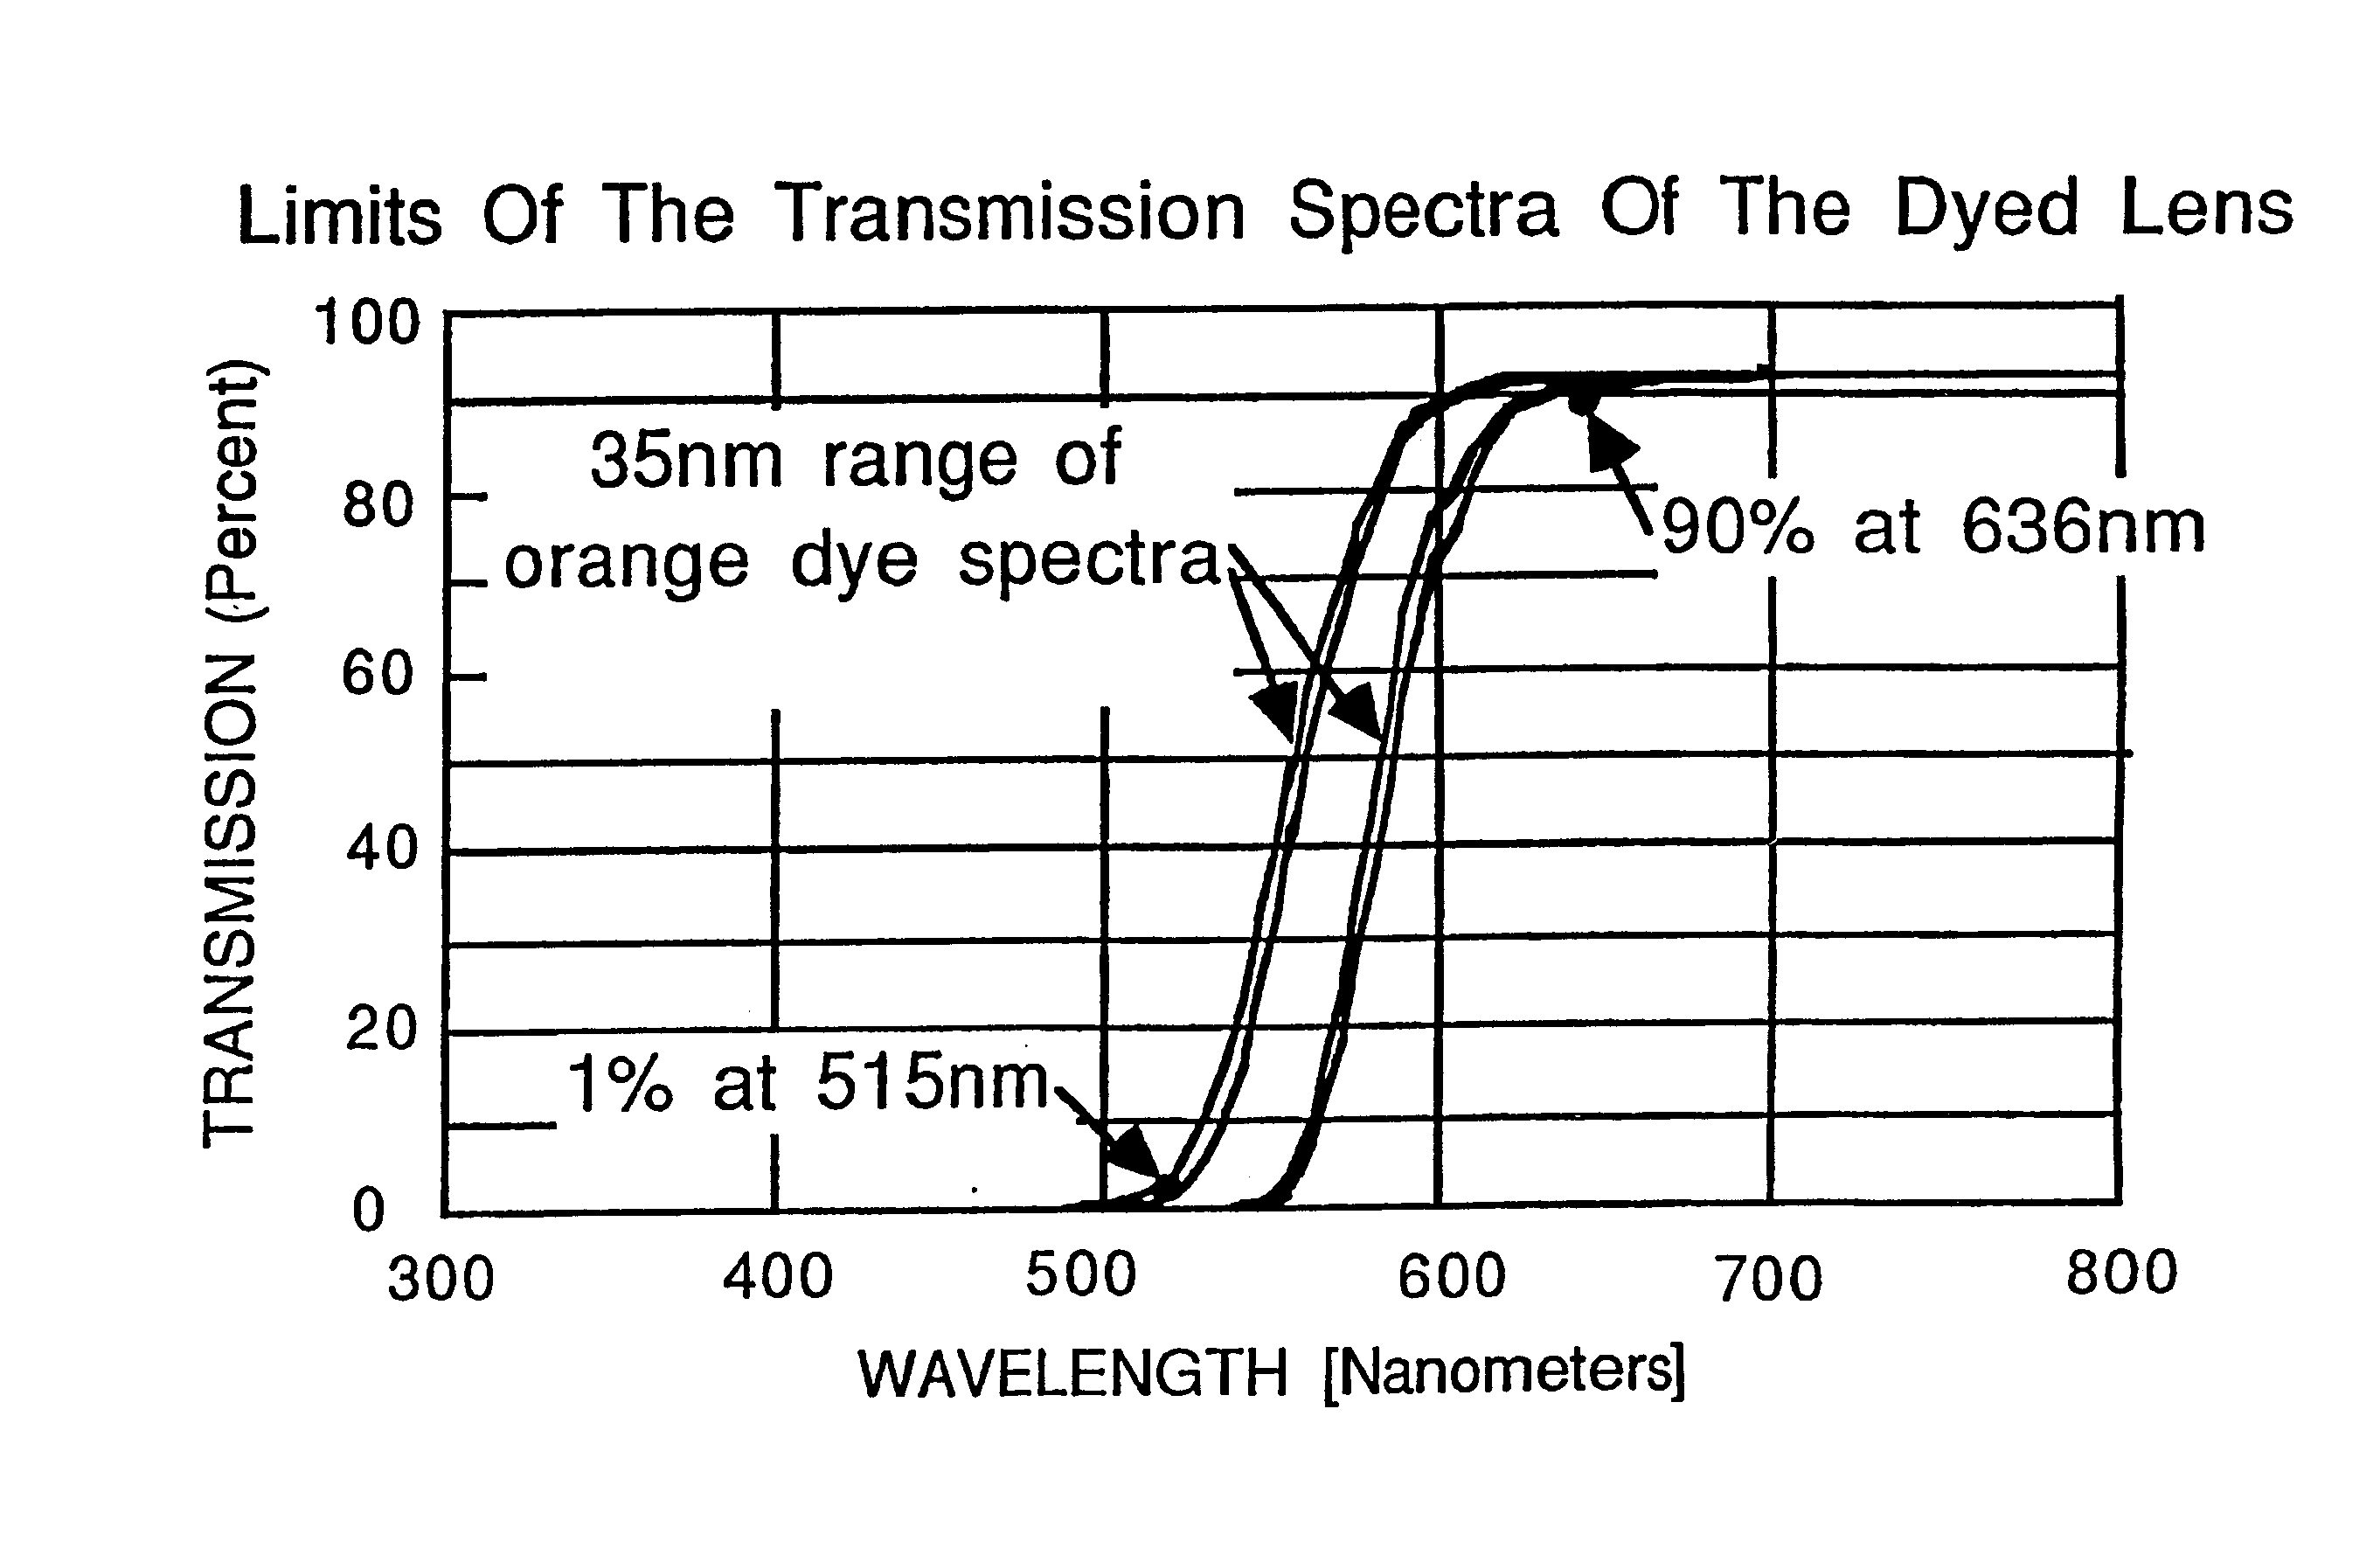 Optical lenses with selective transmissivity functions